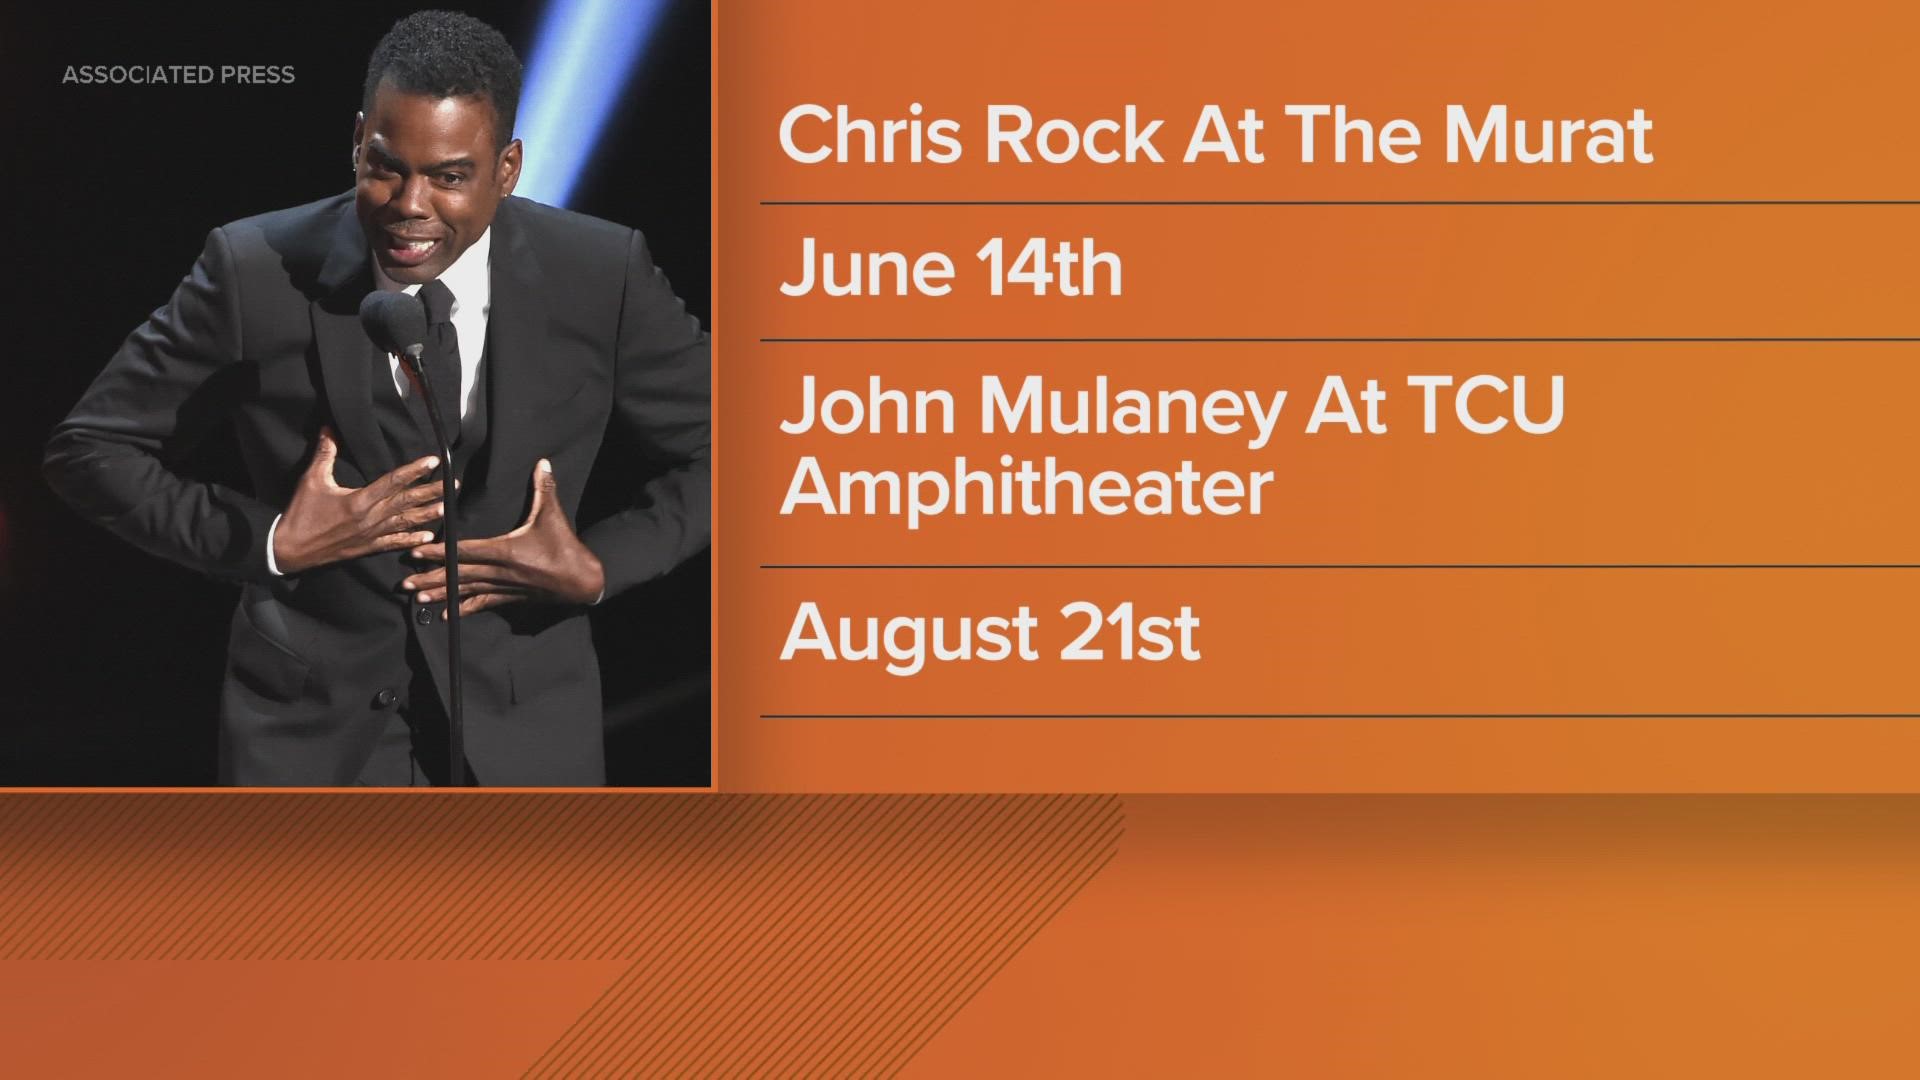 Chris Rock will perform in Indianapolis on June 14 while John Mulaney will perform on Aug. 21.